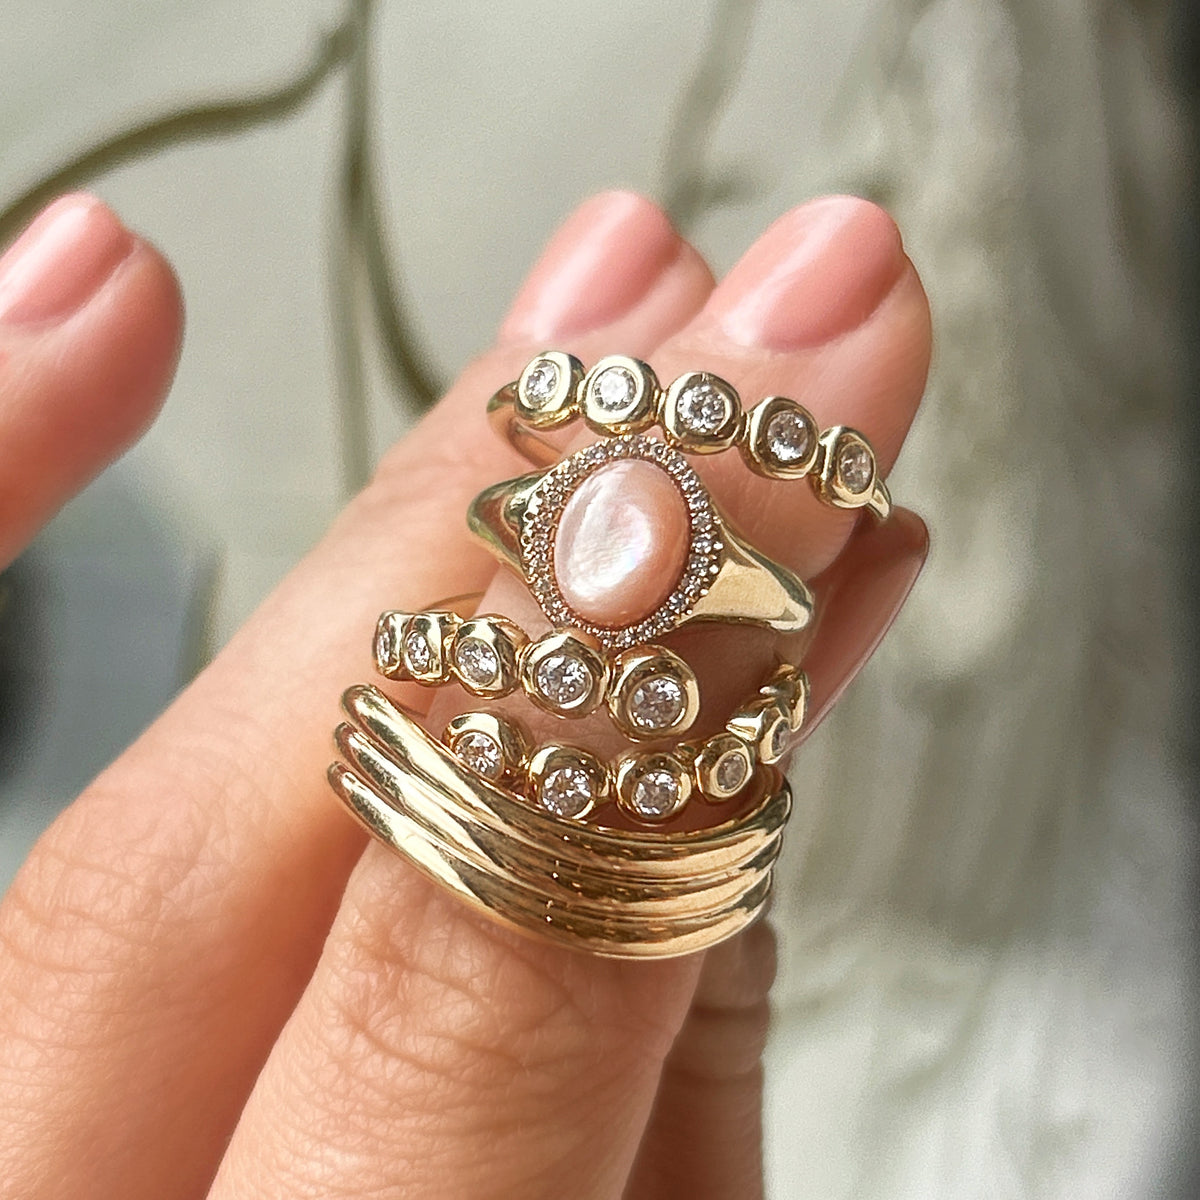 Diamond &amp; Pink Mother of Pearl Cabochon Signet Ring